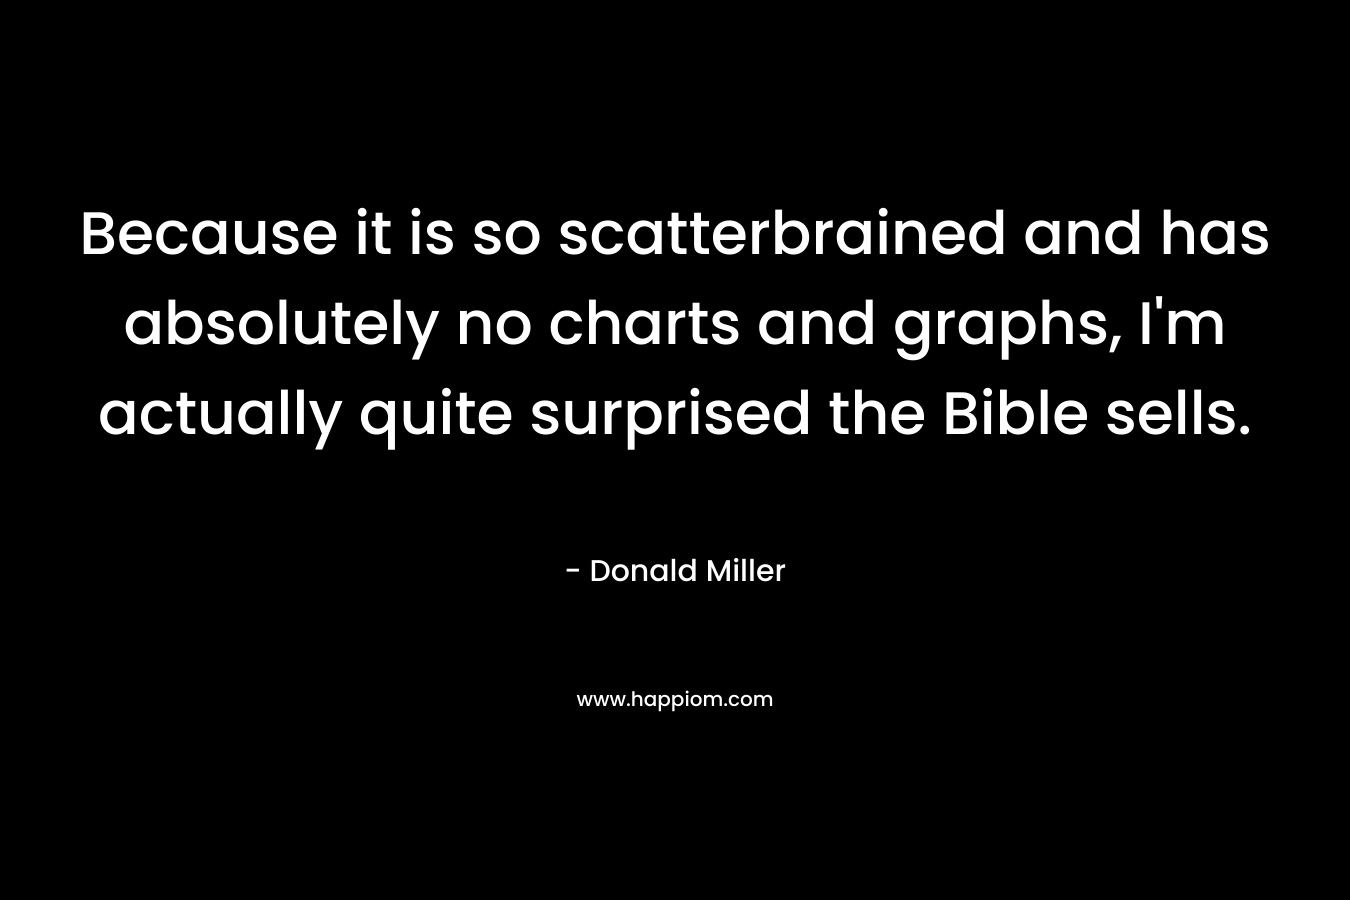 Because it is so scatterbrained and has absolutely no charts and graphs, I'm actually quite surprised the Bible sells.